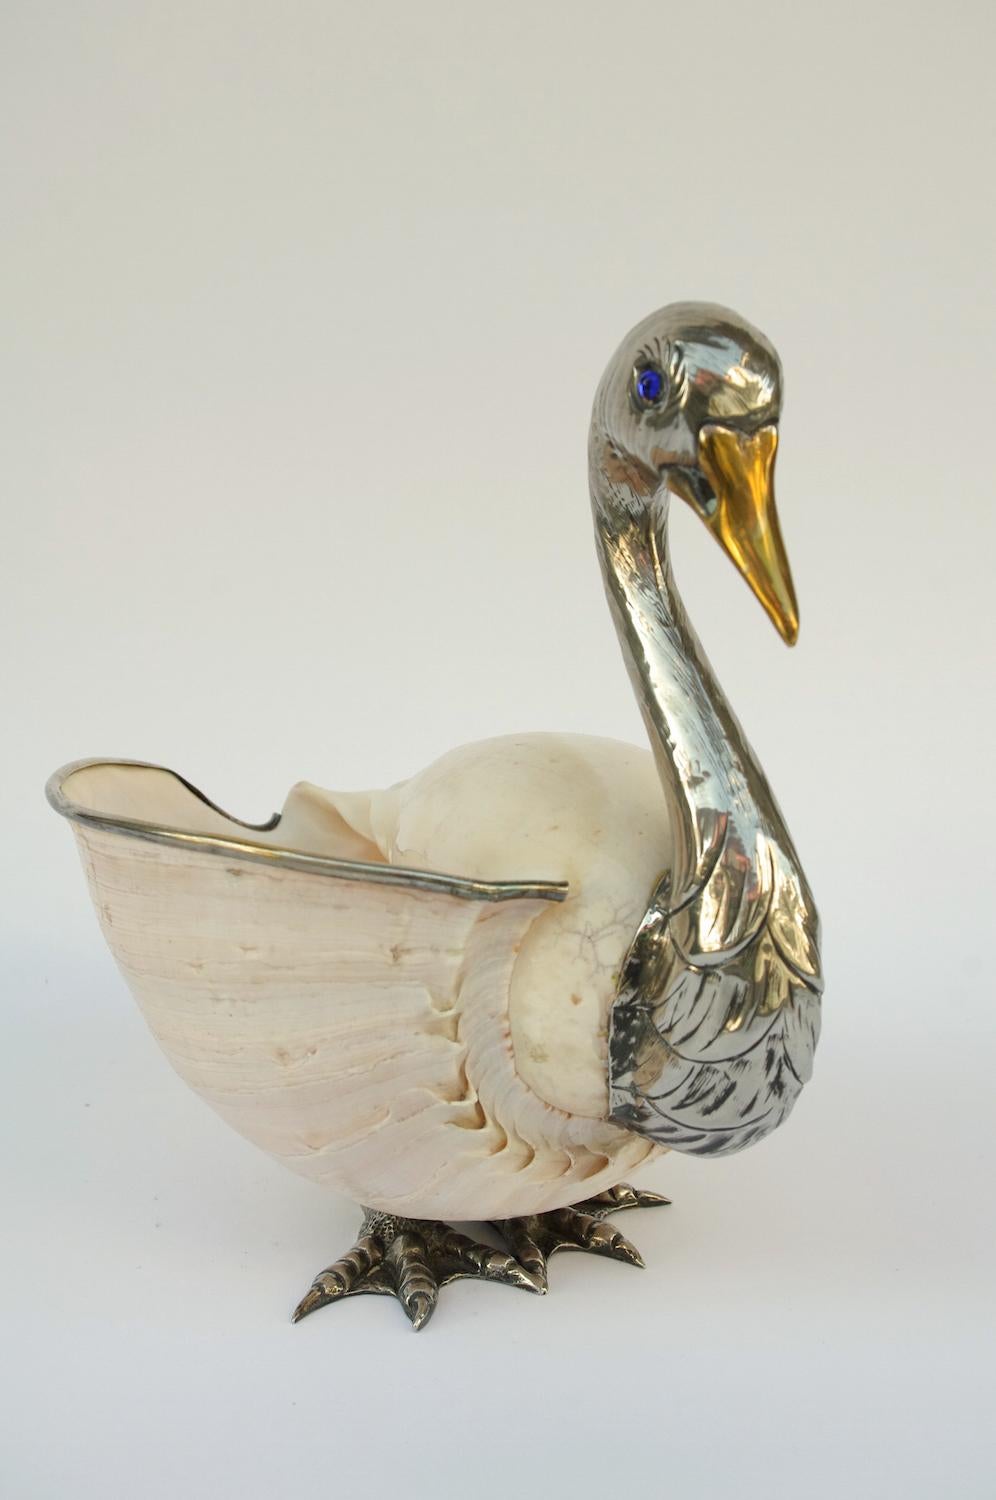 Late 20th Century Swan Trinket Bowl, Shell and Silvered Metal, Signed Binazzi, circa 1970